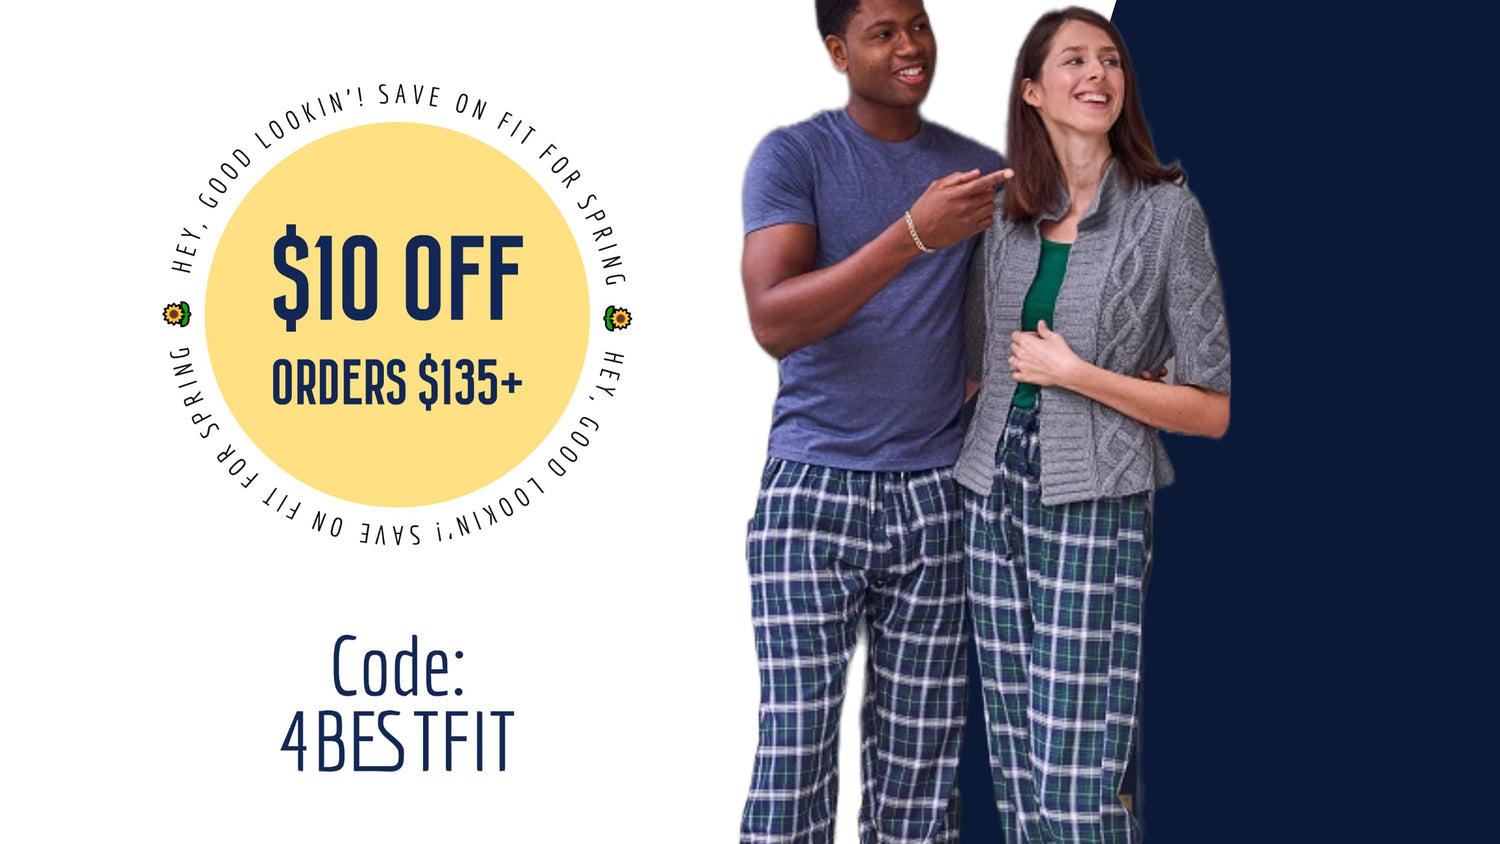 Tall and Short Men's Pajama Bottoms. Tall and Petite Women's Pajamas and Loungewear.  Tall and Short Sizes are on Sale Now at FORtheFIT - Tall Shirts and Pants ; Petite Womens Pants and Shirts. Loungewear and Sleepwear in short lengths and tall lengths